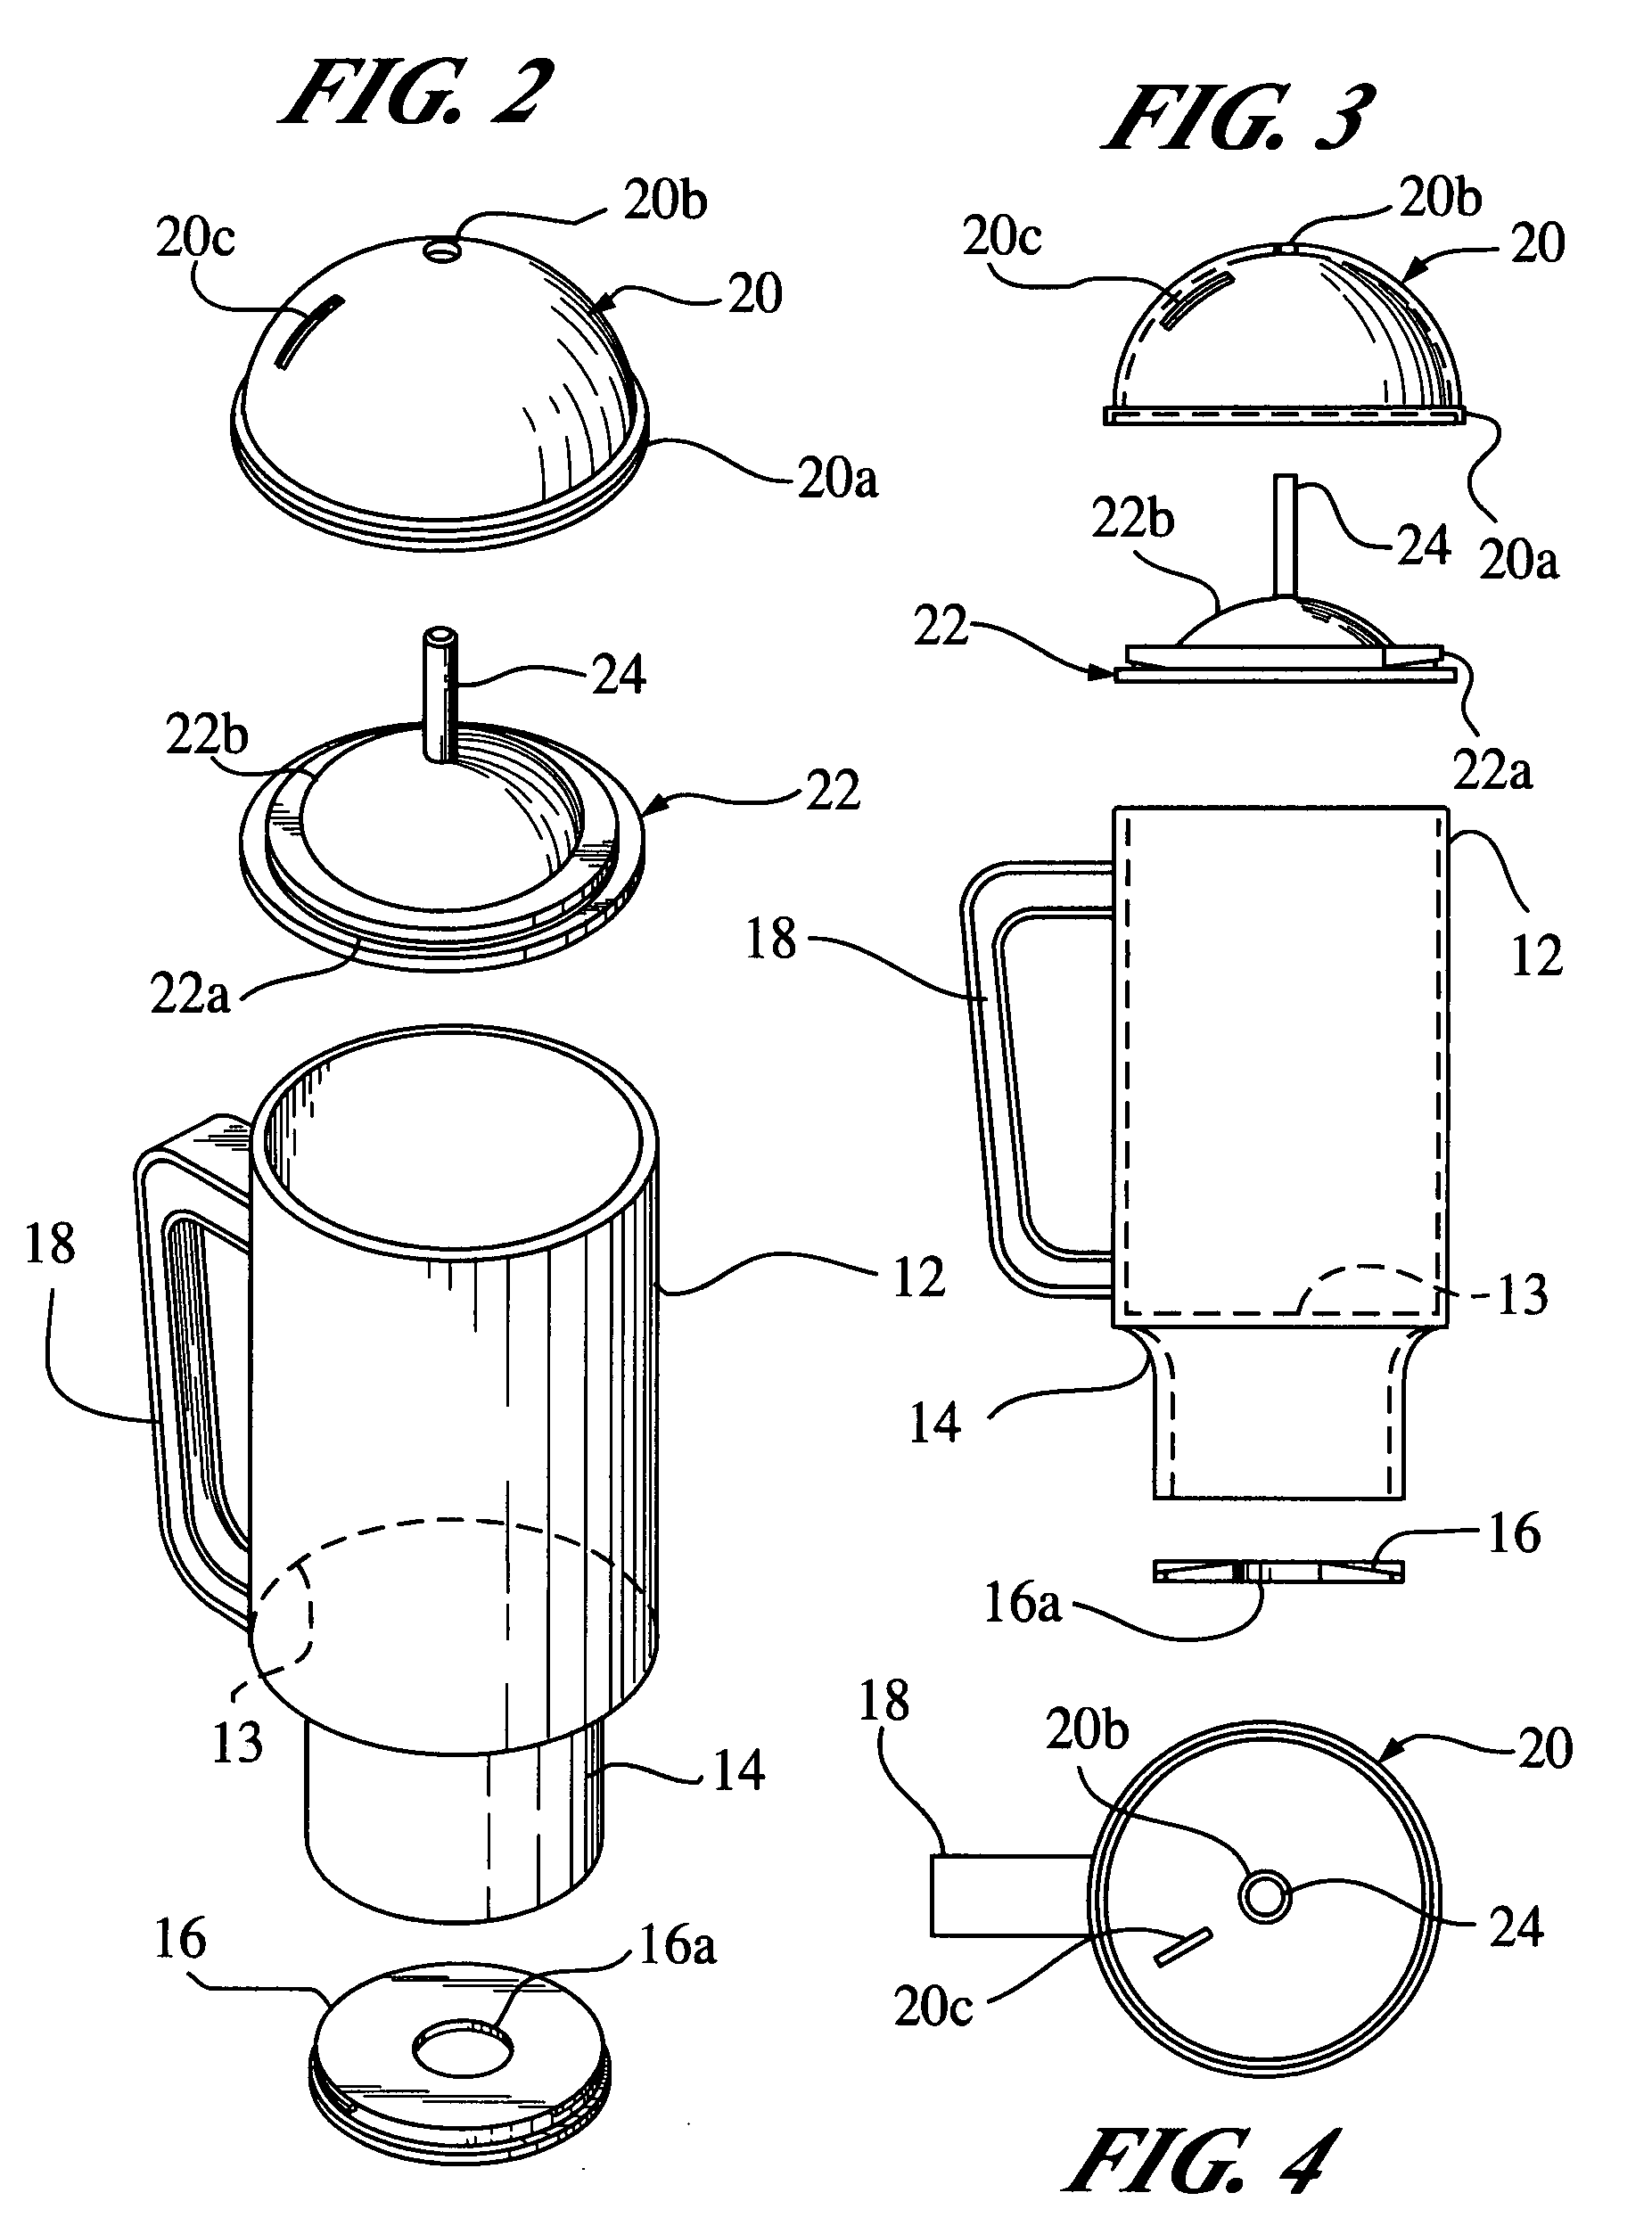 Compartmentalized beverage container device